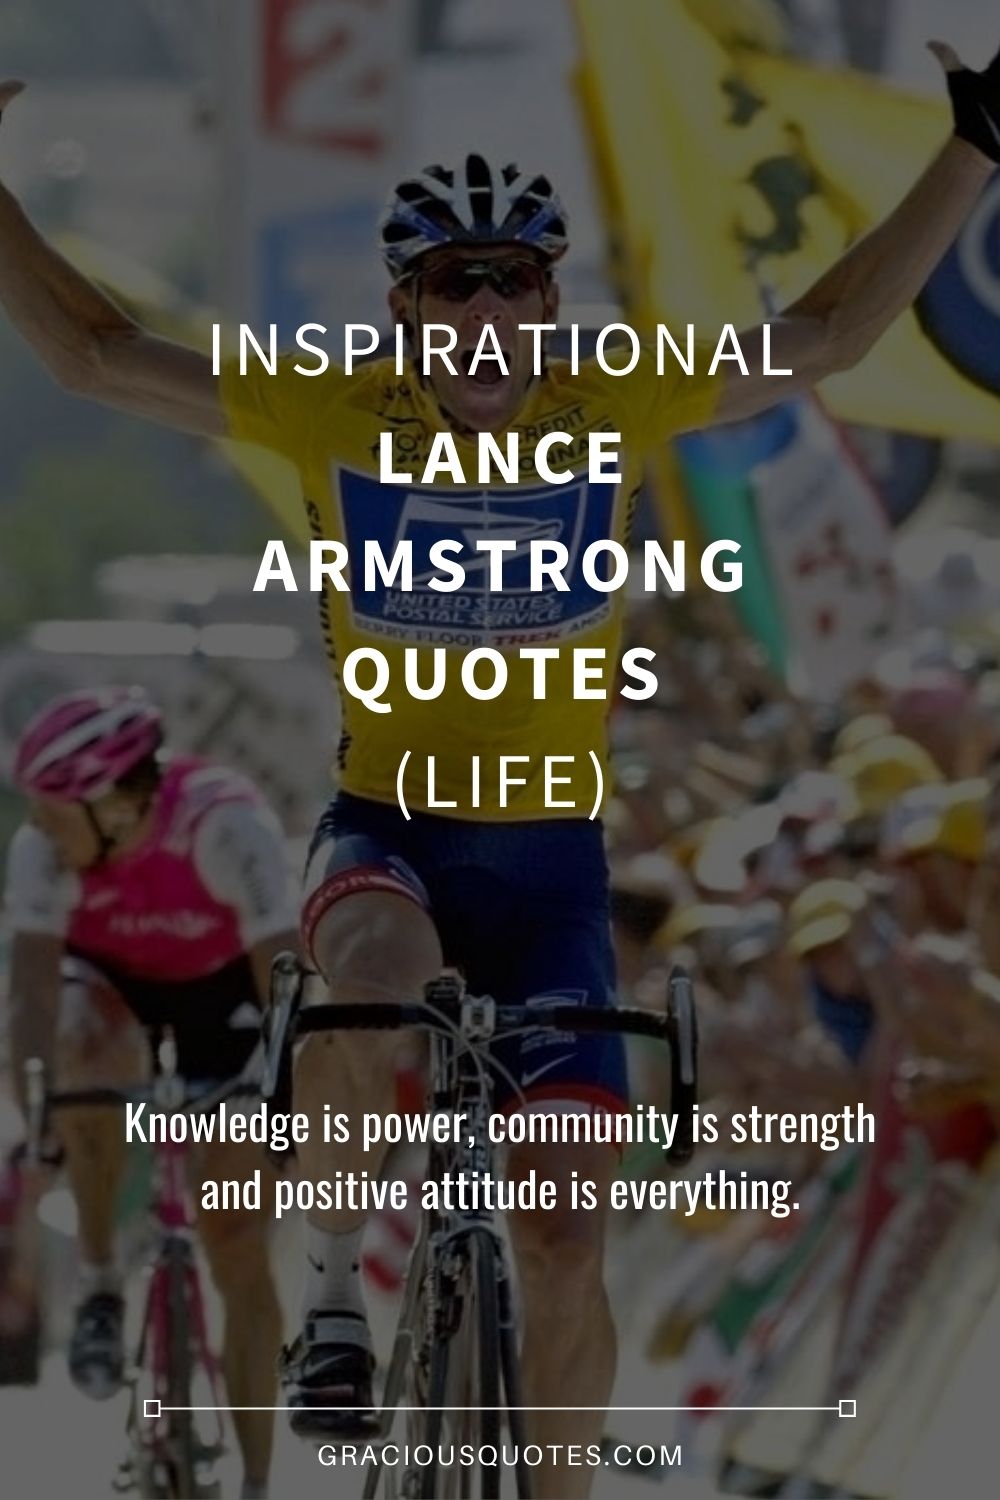 Inspirational Lance Armstrong Quotes (LIFE) - Gracious Quotes